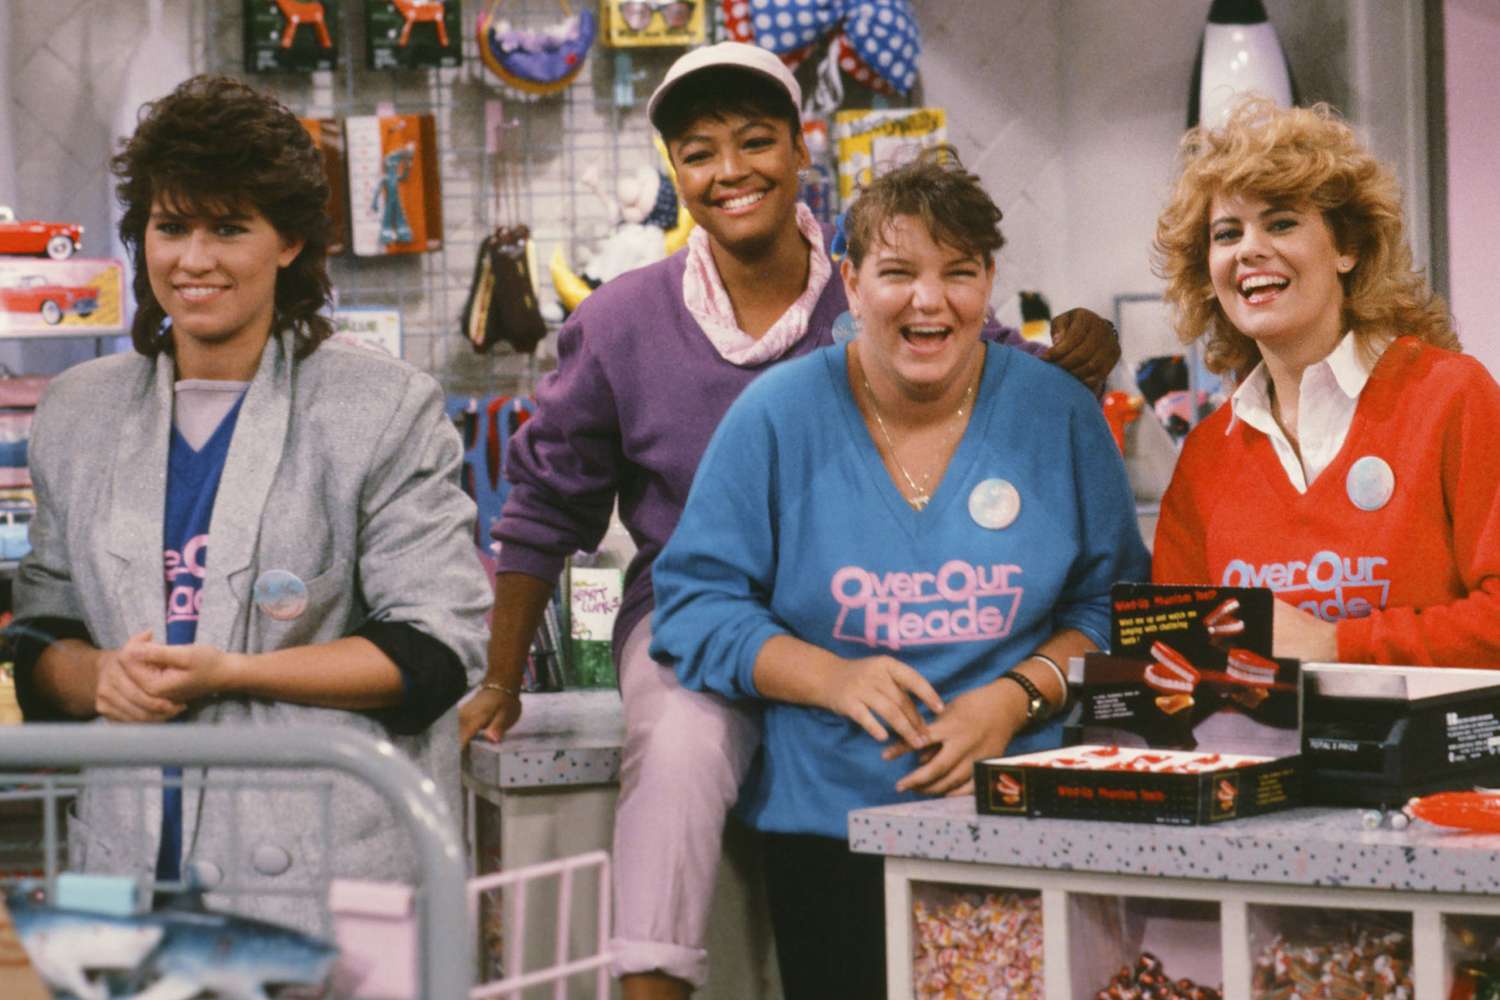 'The Facts of Life' revival spoiled by greedy costar, Mindy Cohn says